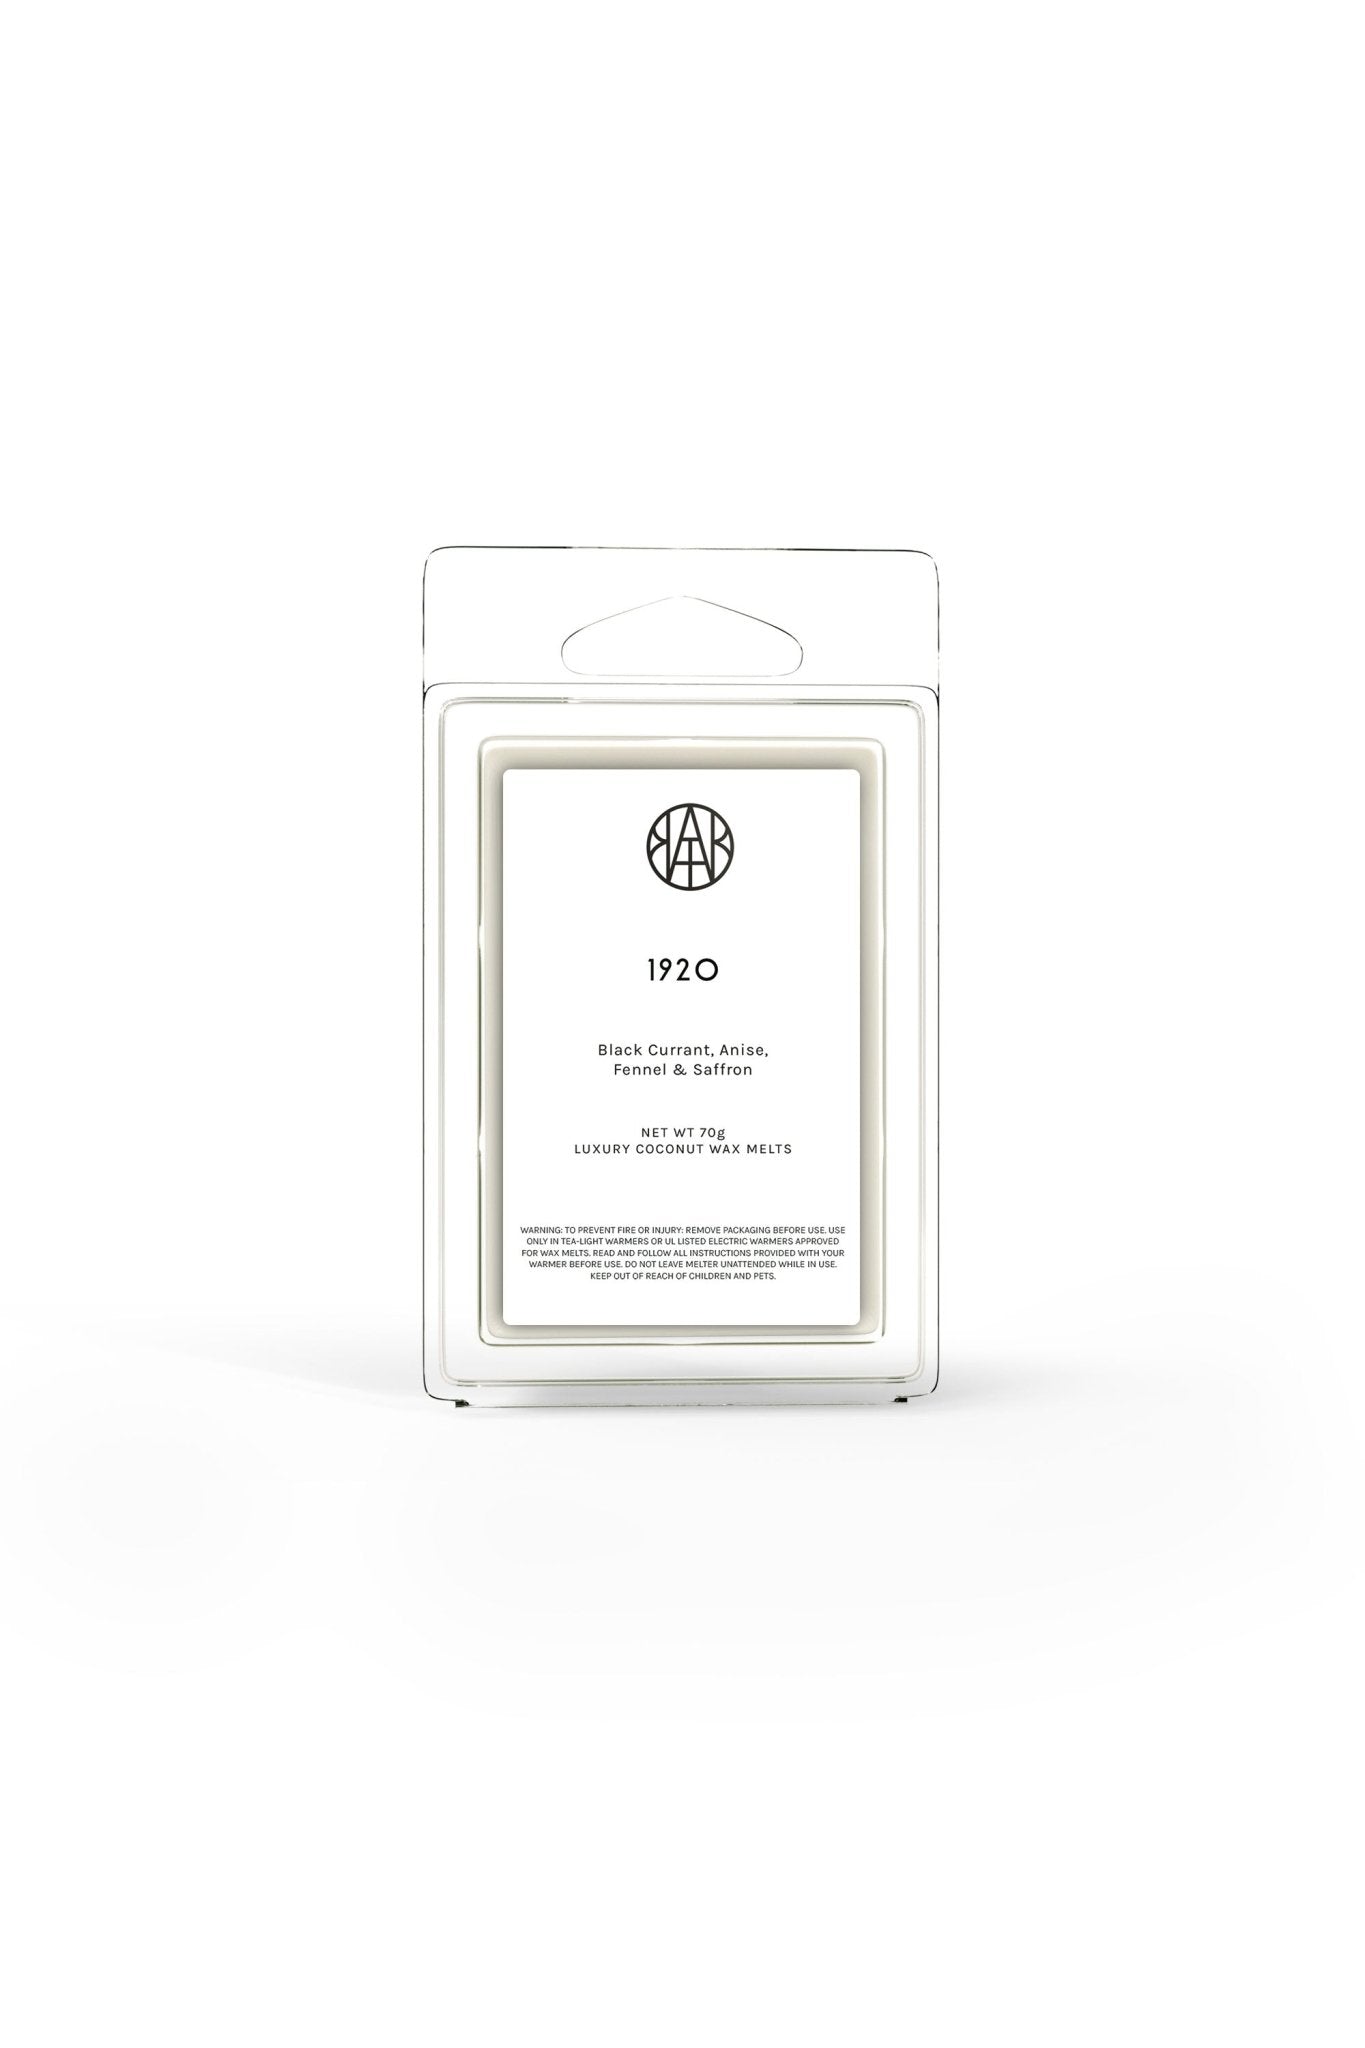 1920 - Wax Melt - AEMBR - Clean Luxury Candles, Wax Melts & Laundry Care